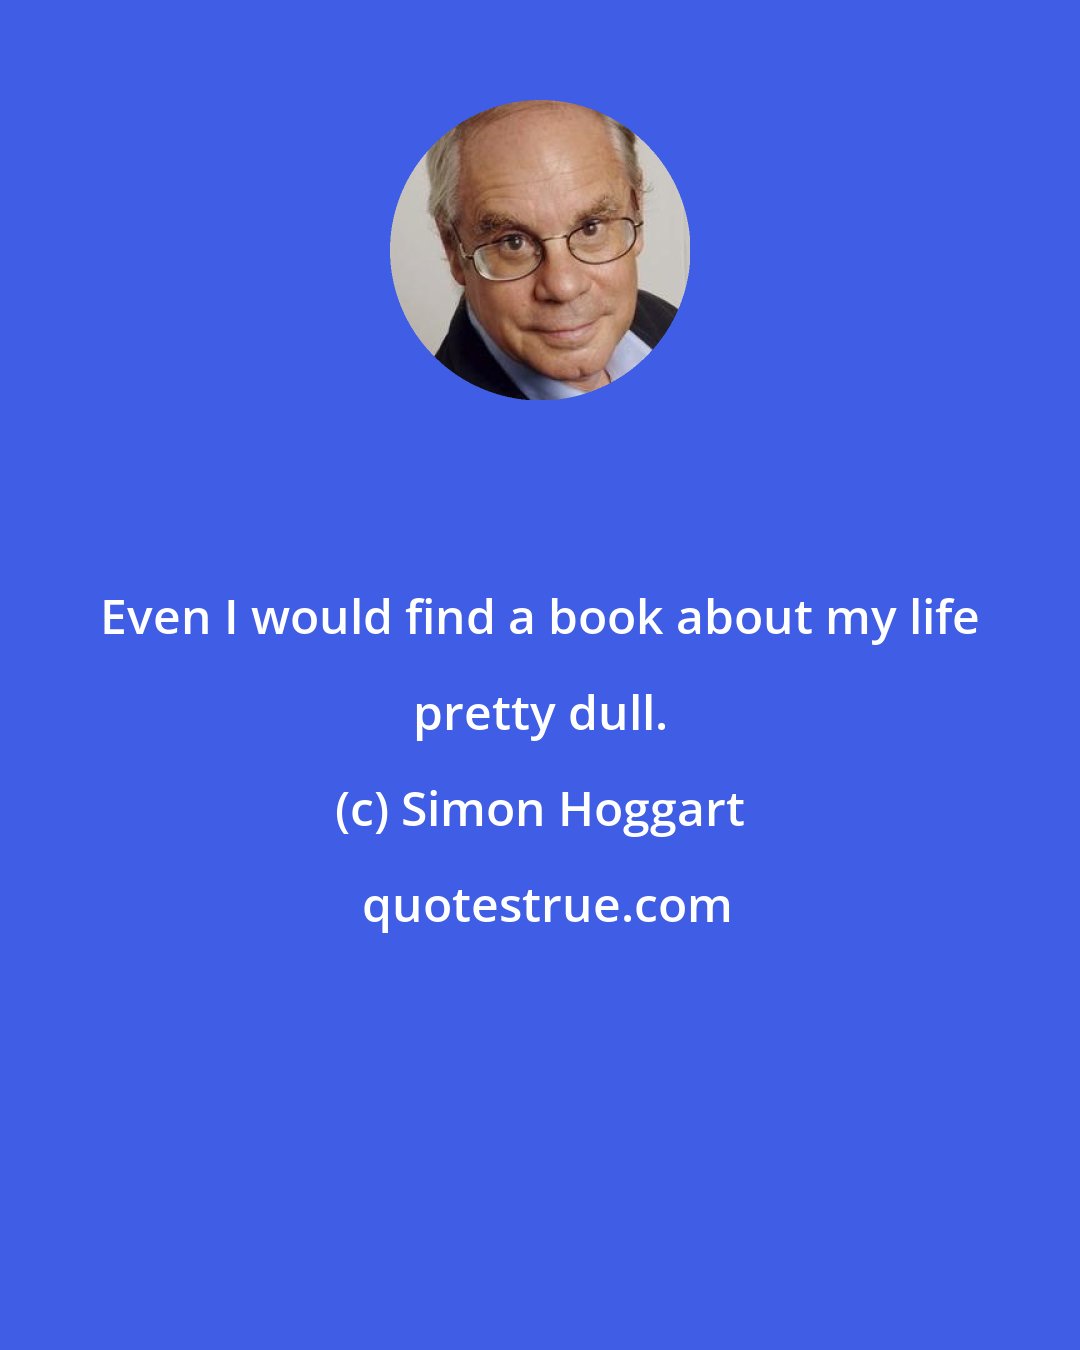 Simon Hoggart: Even I would find a book about my life pretty dull.